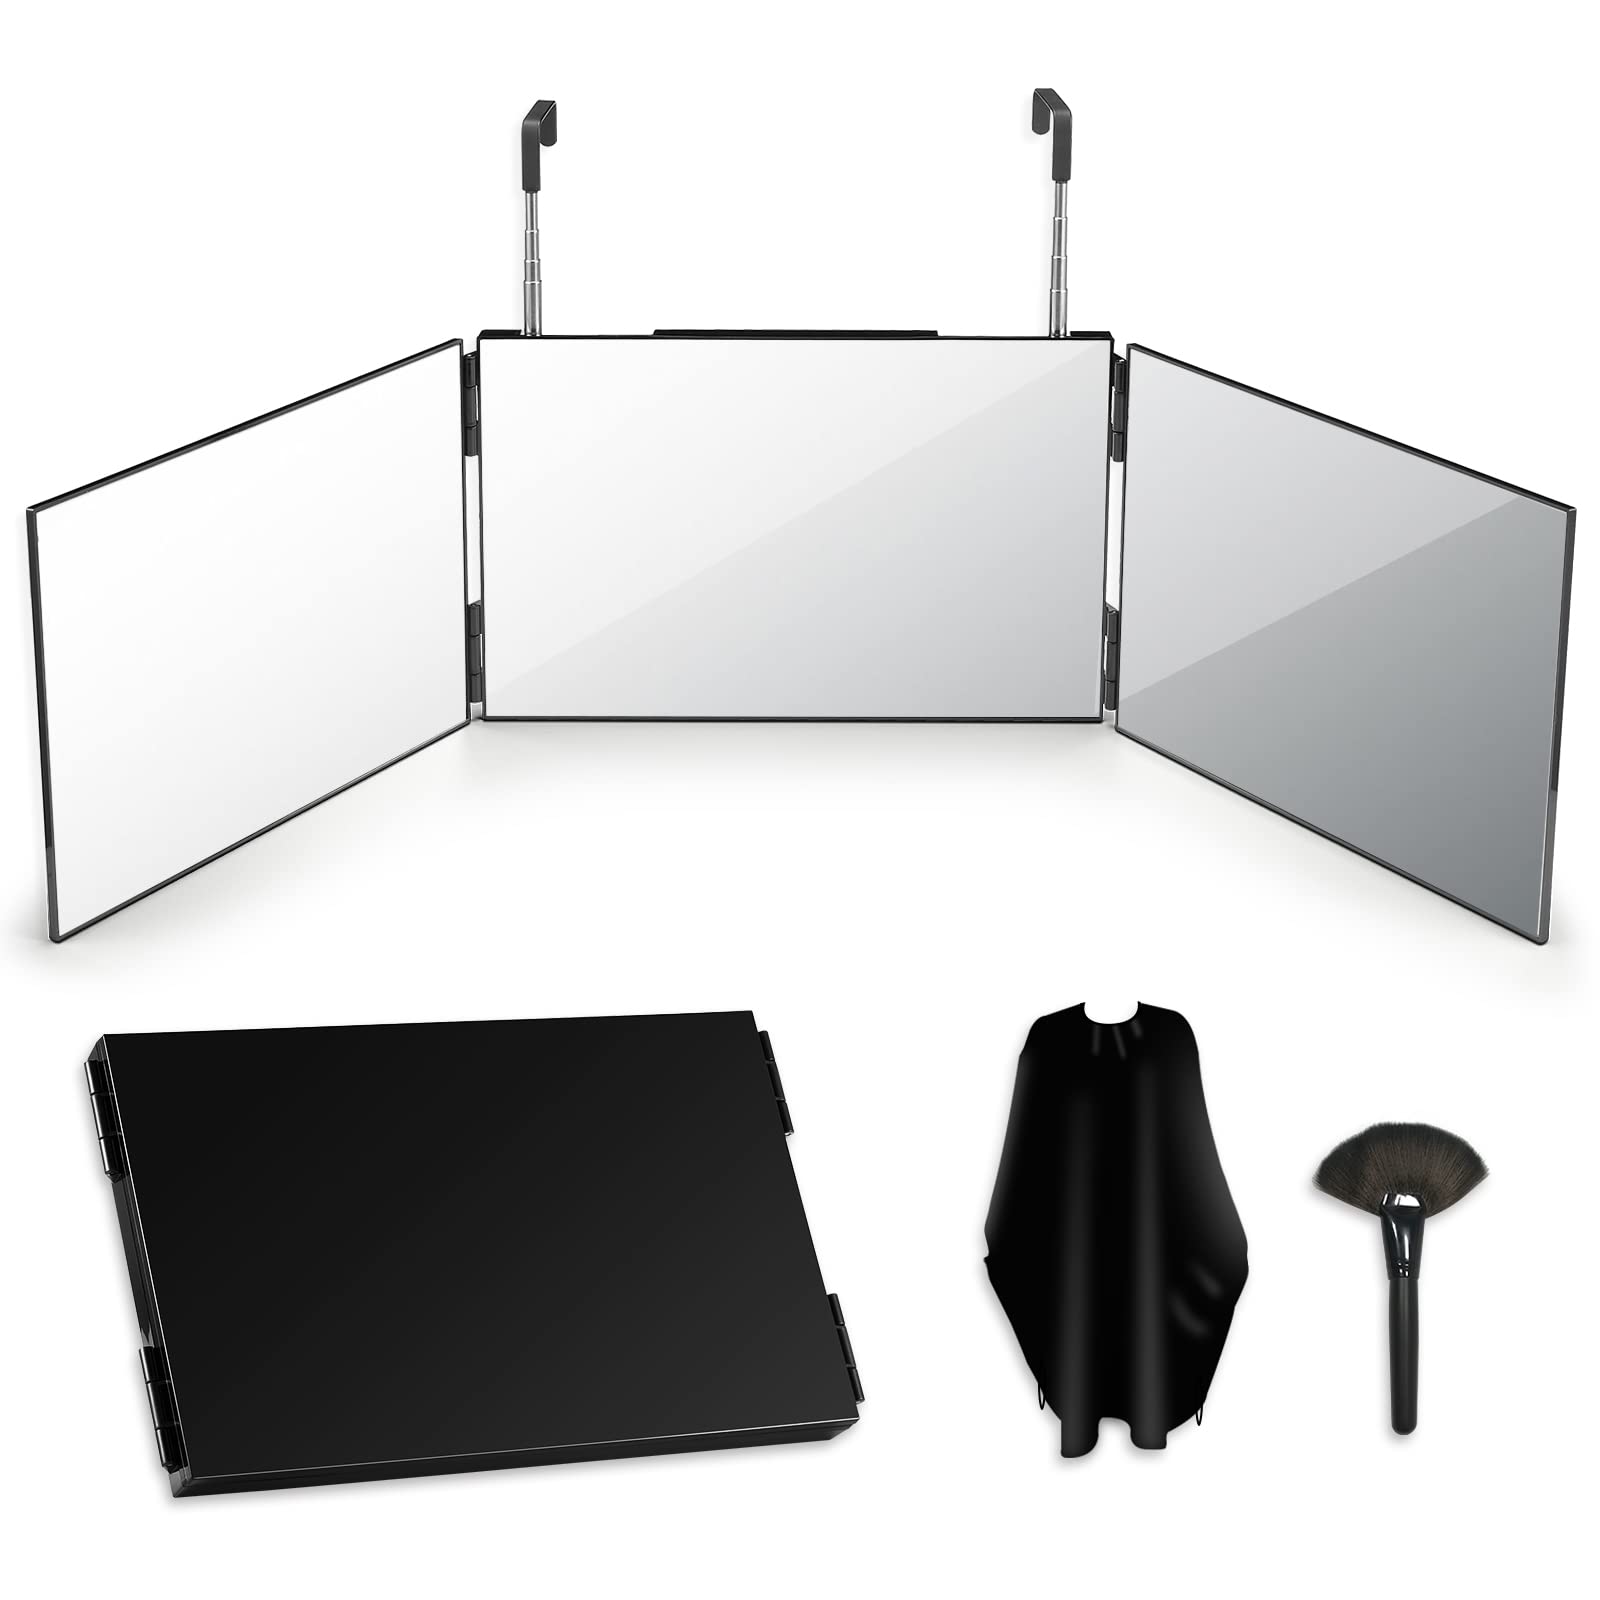  Self-Cut System - 3 Way Mirror for Self Hair Cutting with LED  Lights - Barber Mirror - Trifold Mirror - Three Way Mirror - 360 Mirror for  Self Haircuts : Beauty & Personal Care